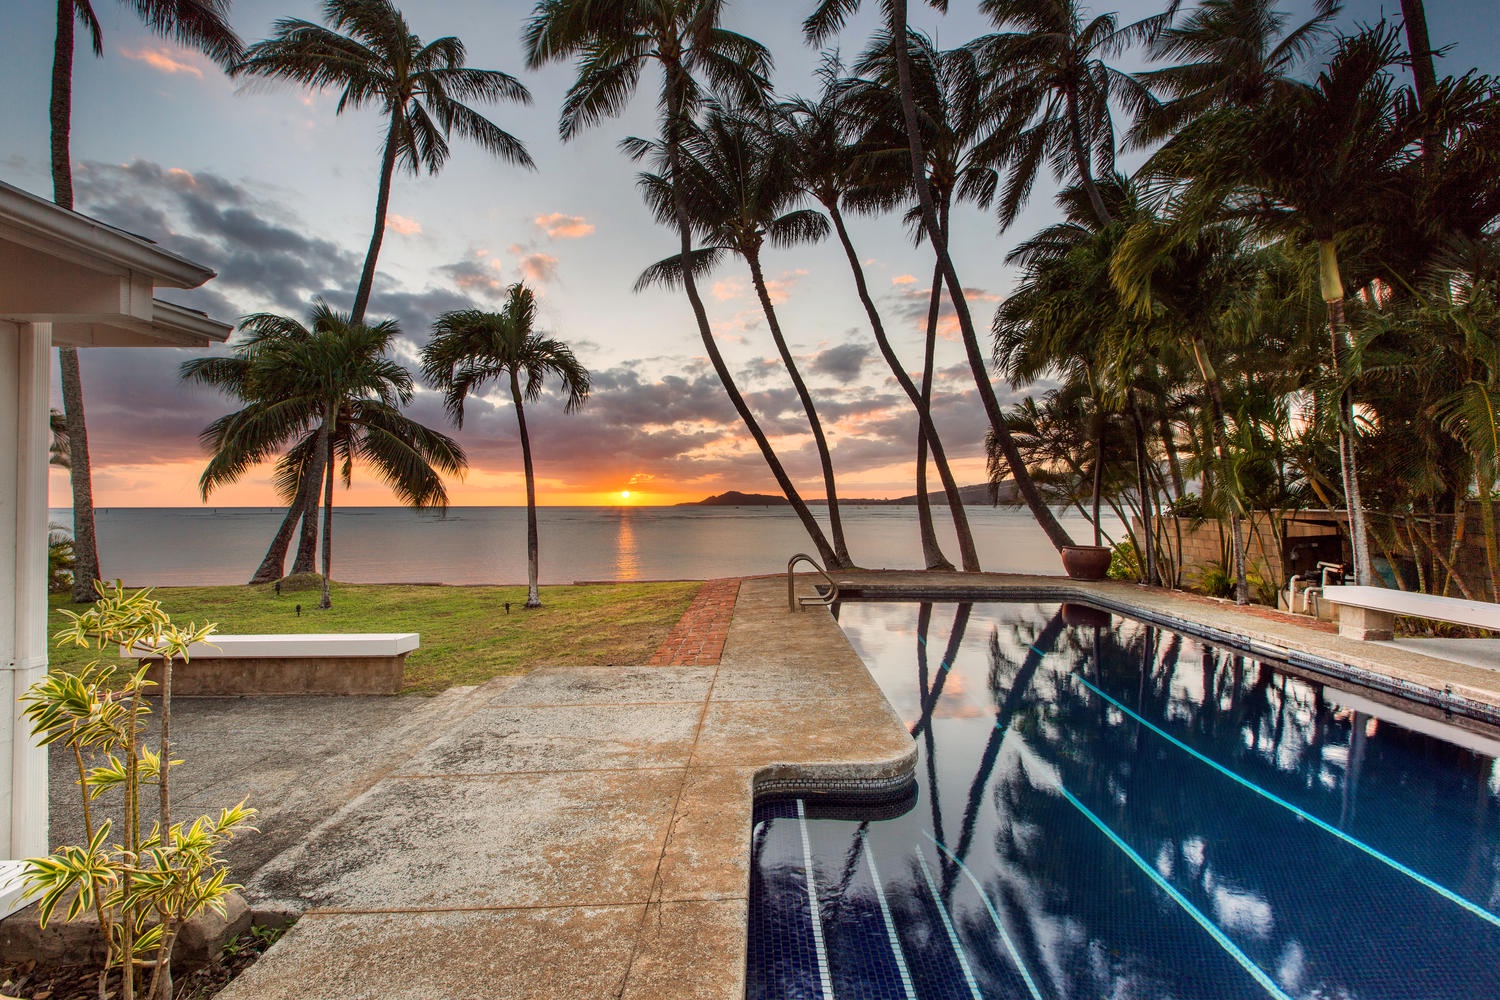 Honolulu Vacation Rentals, Hale Kai - Sunset views from the private pool can't be beat!